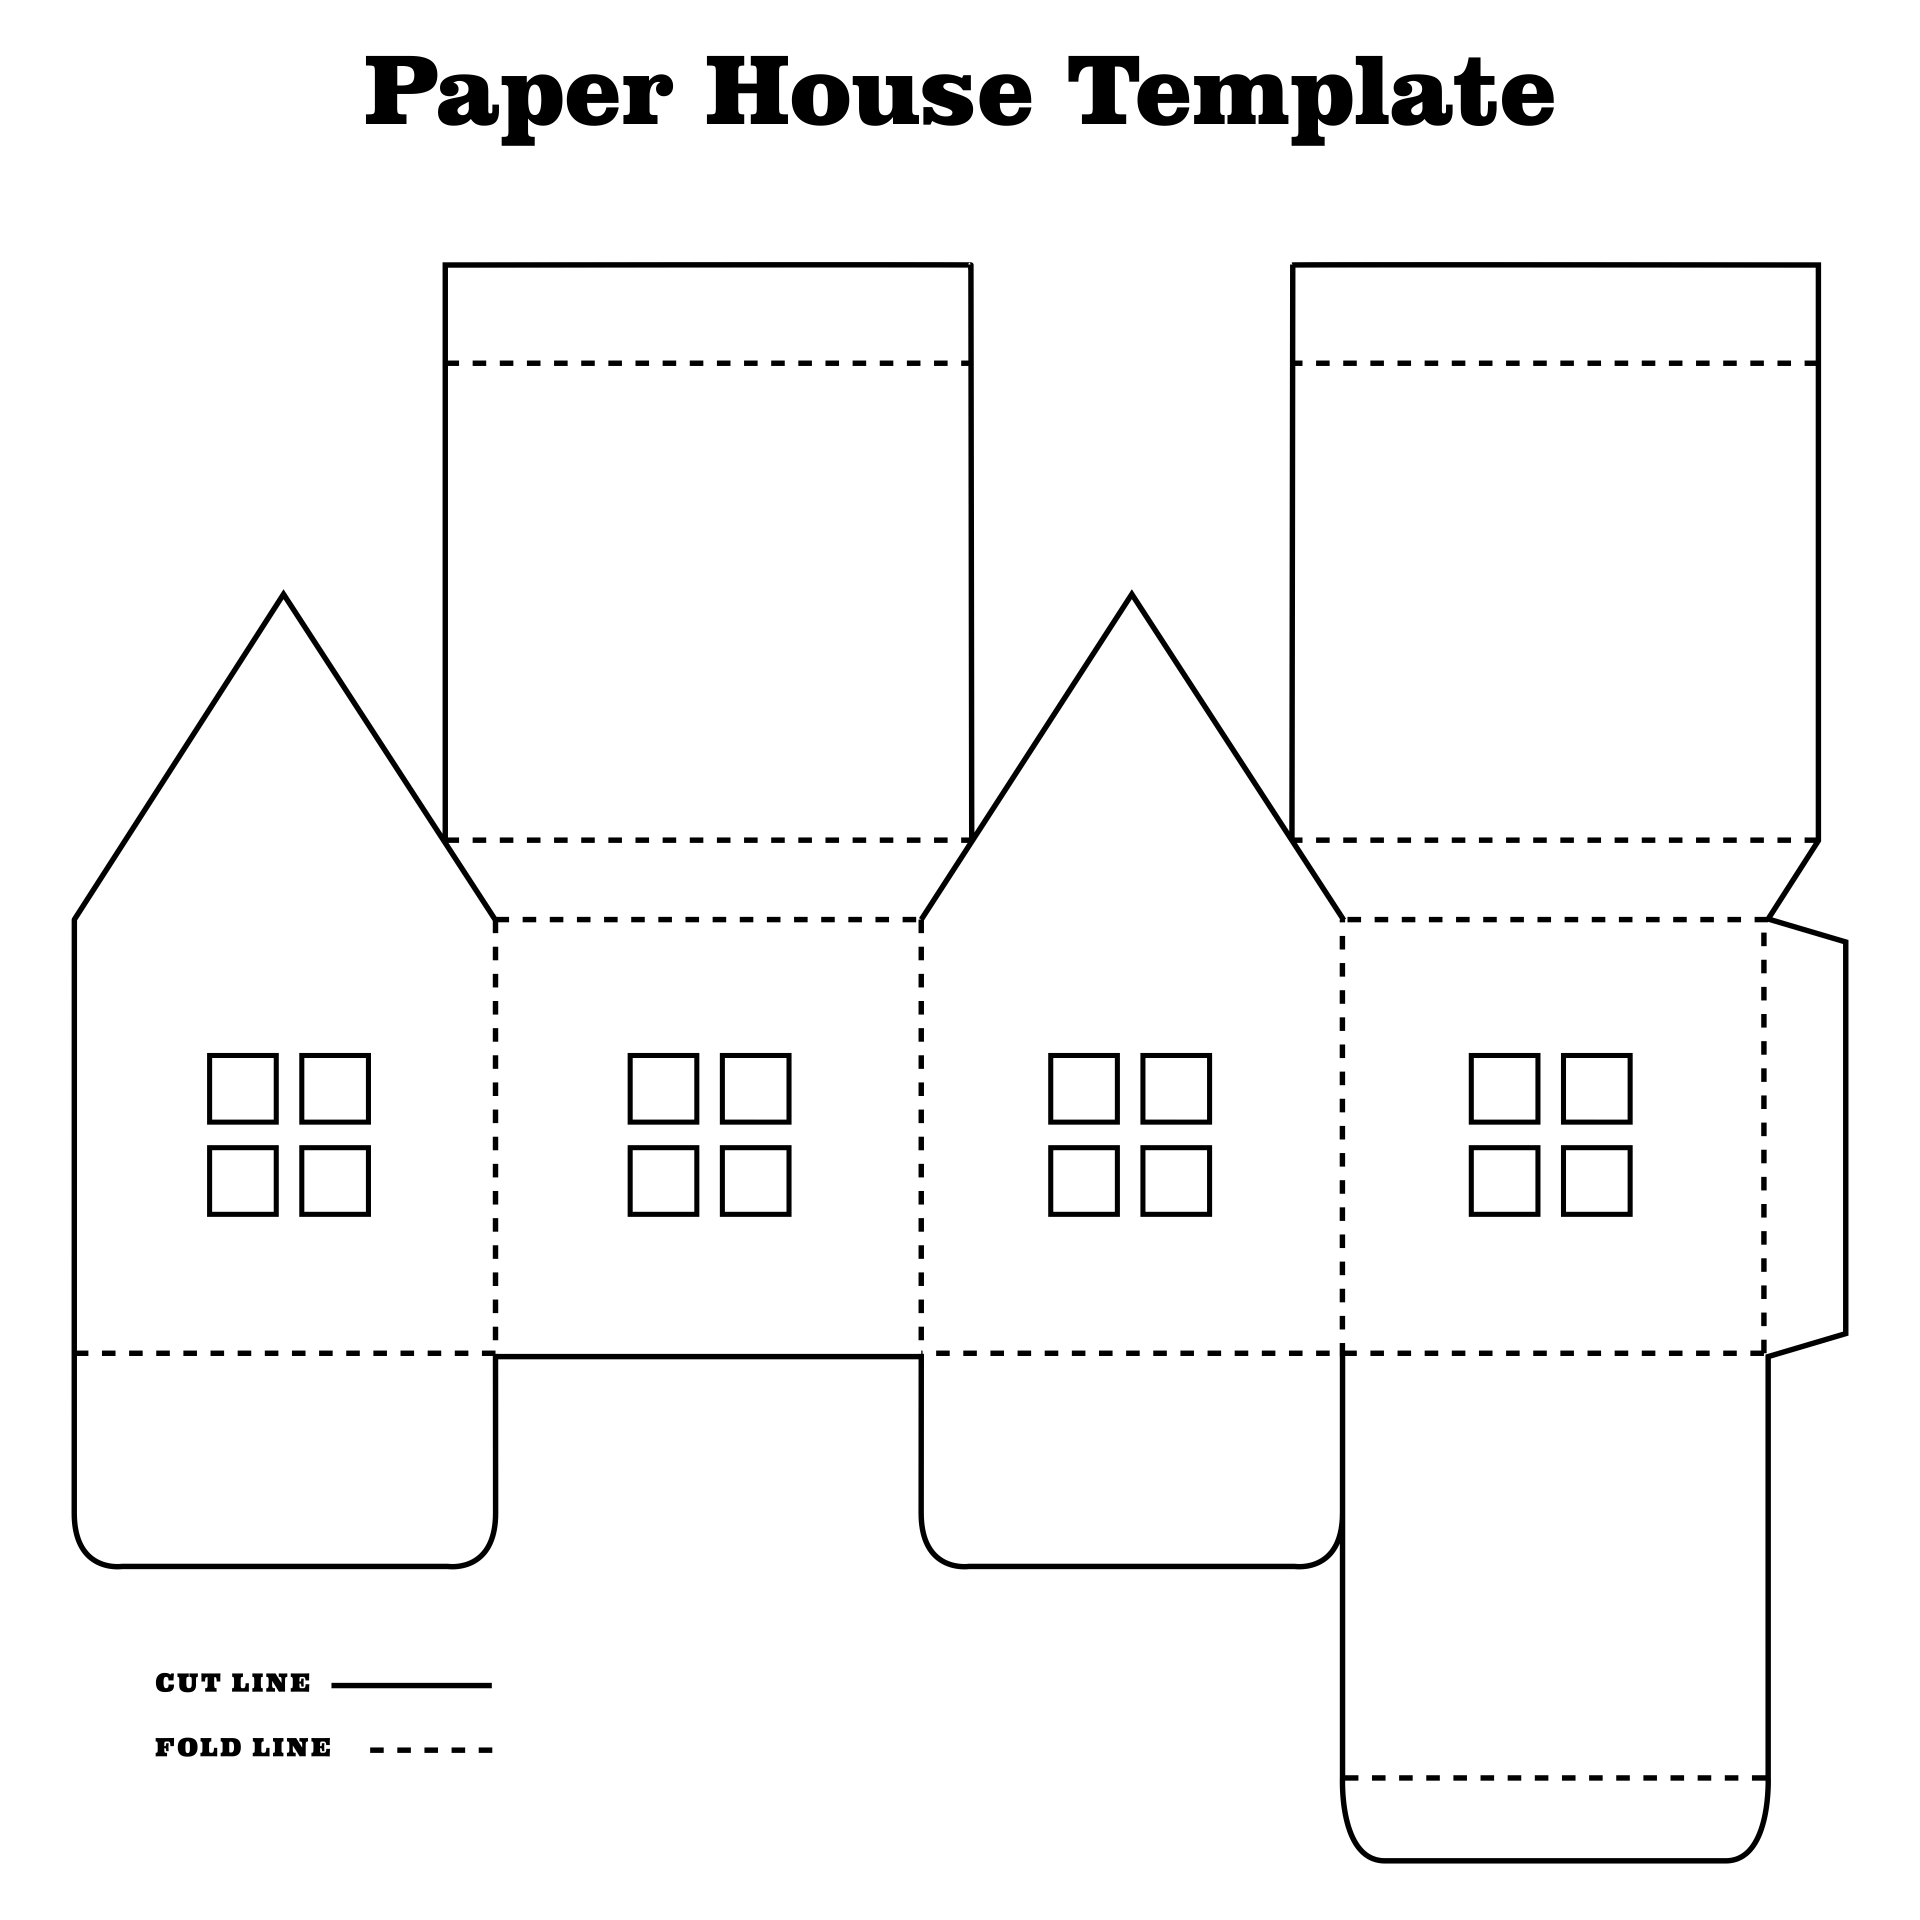 Free Printable Paper House Template Printable Form, Templates and Letter